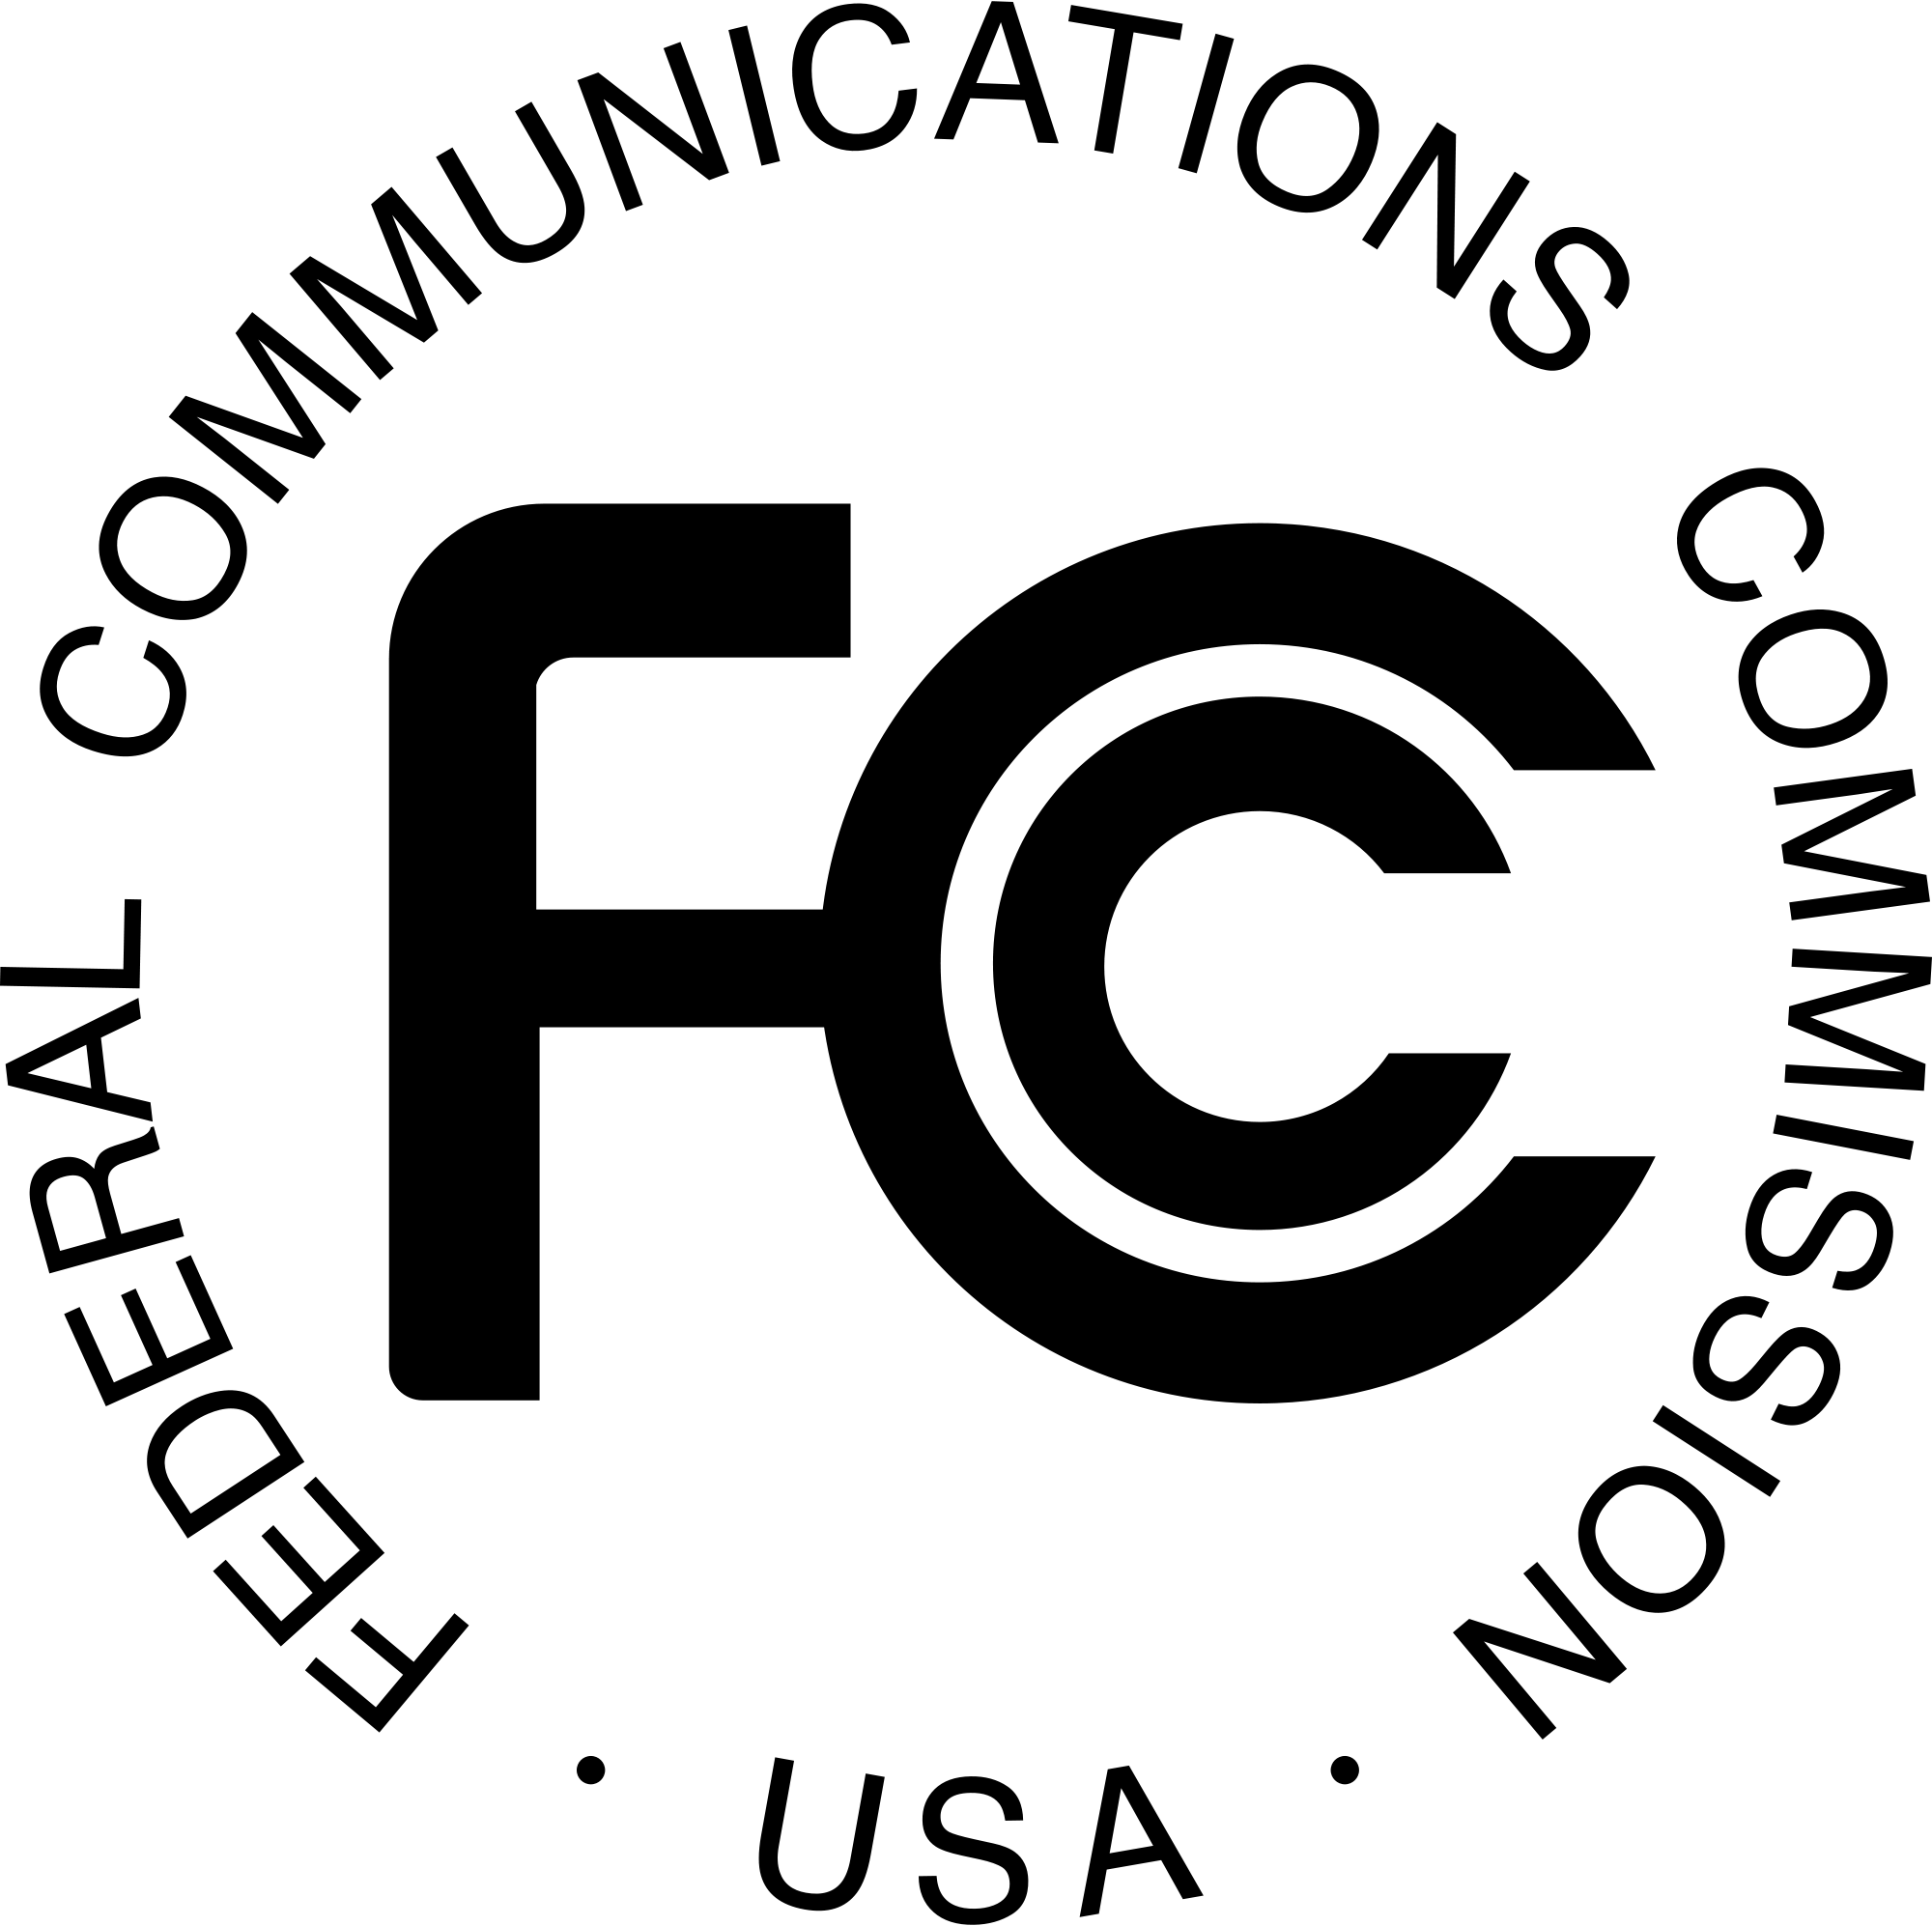 Old FCC Logo - Environmental Health Trust Outdated FCC “Safety” Standards